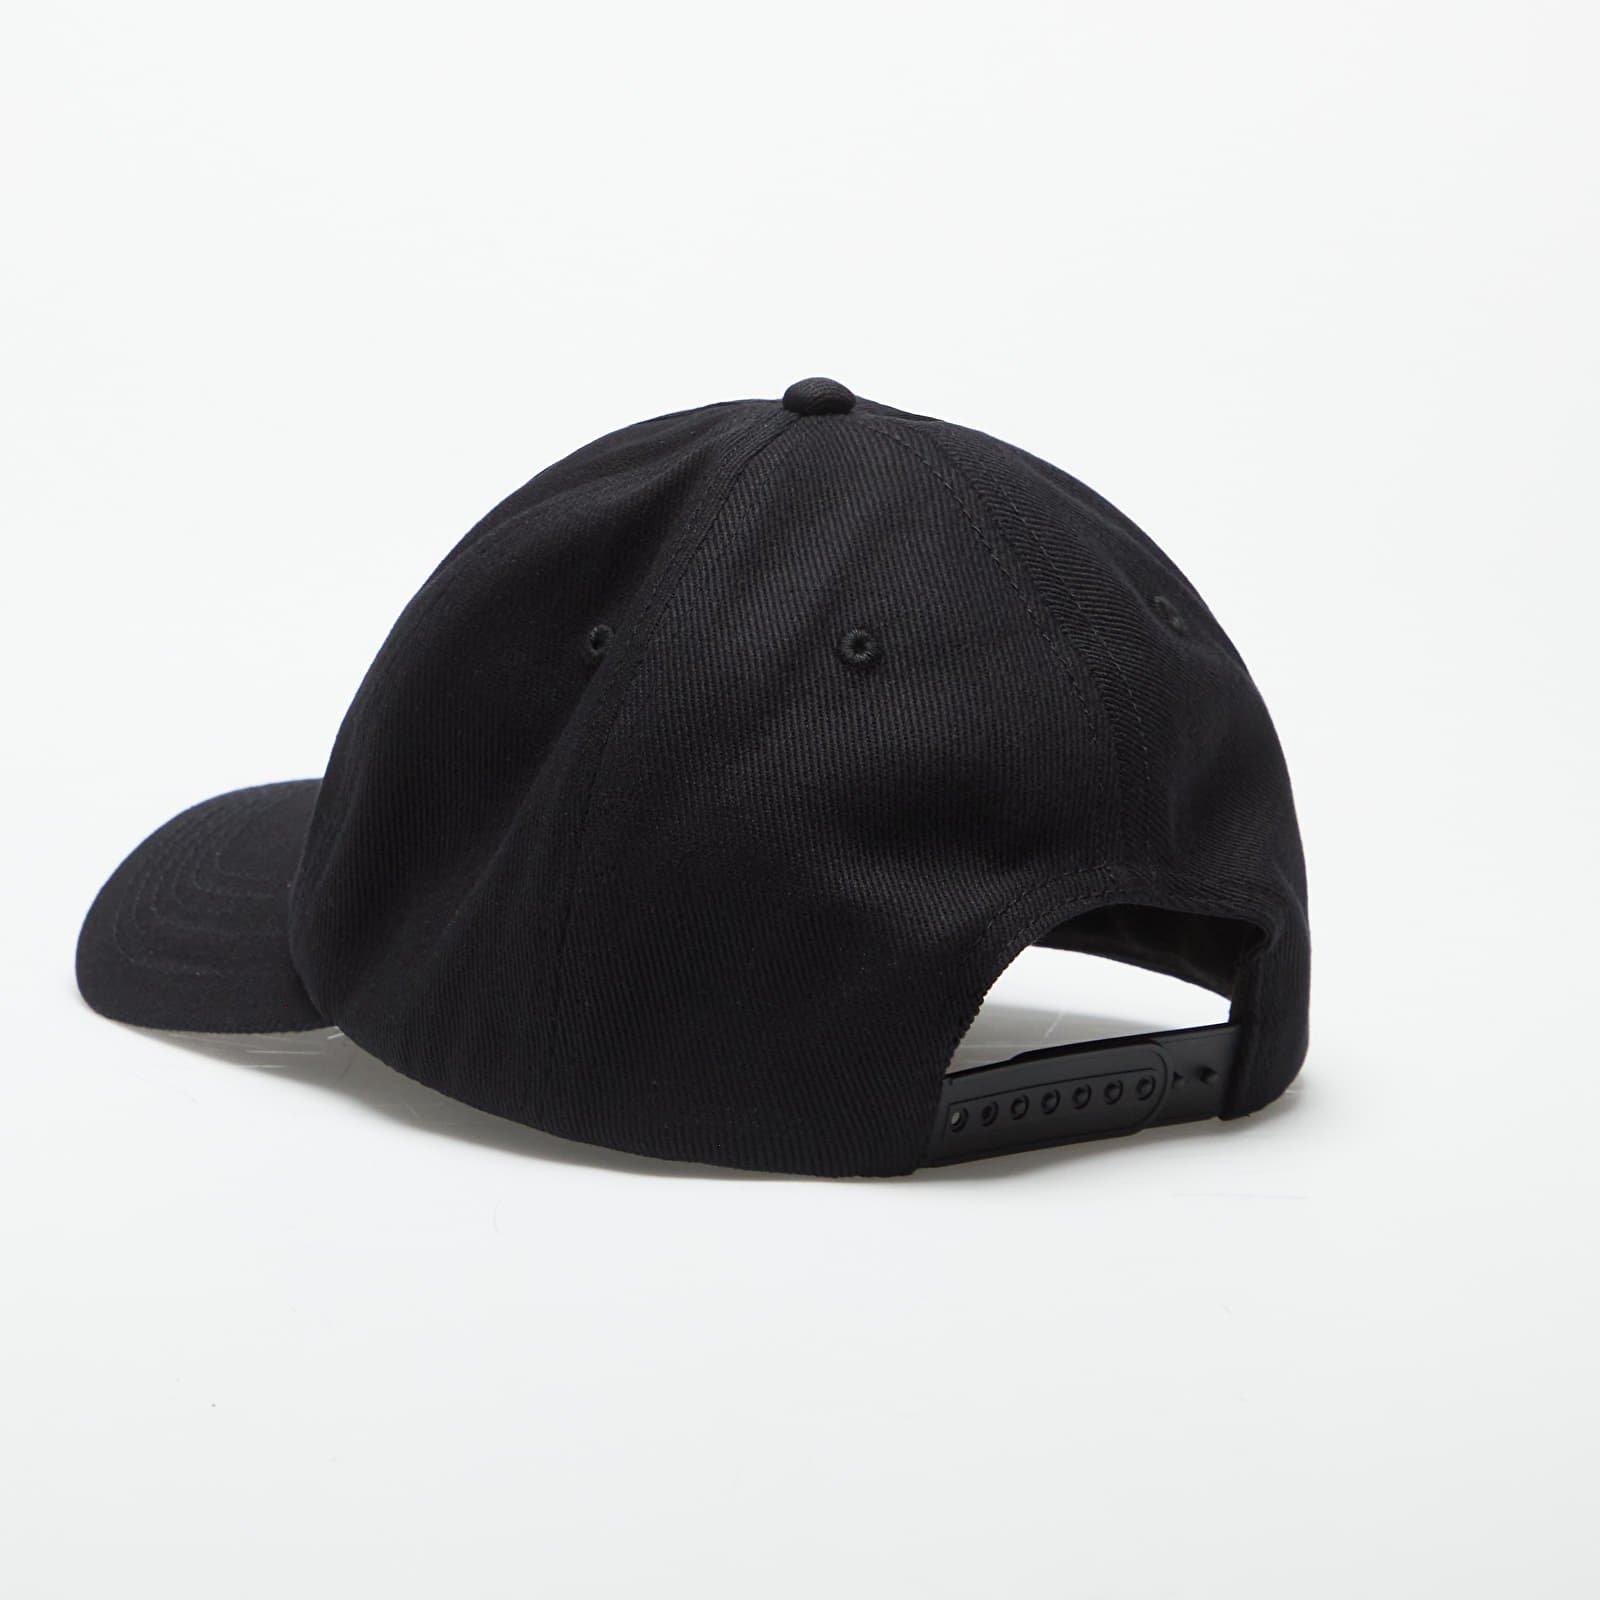 Appointment Unconstructed Cap